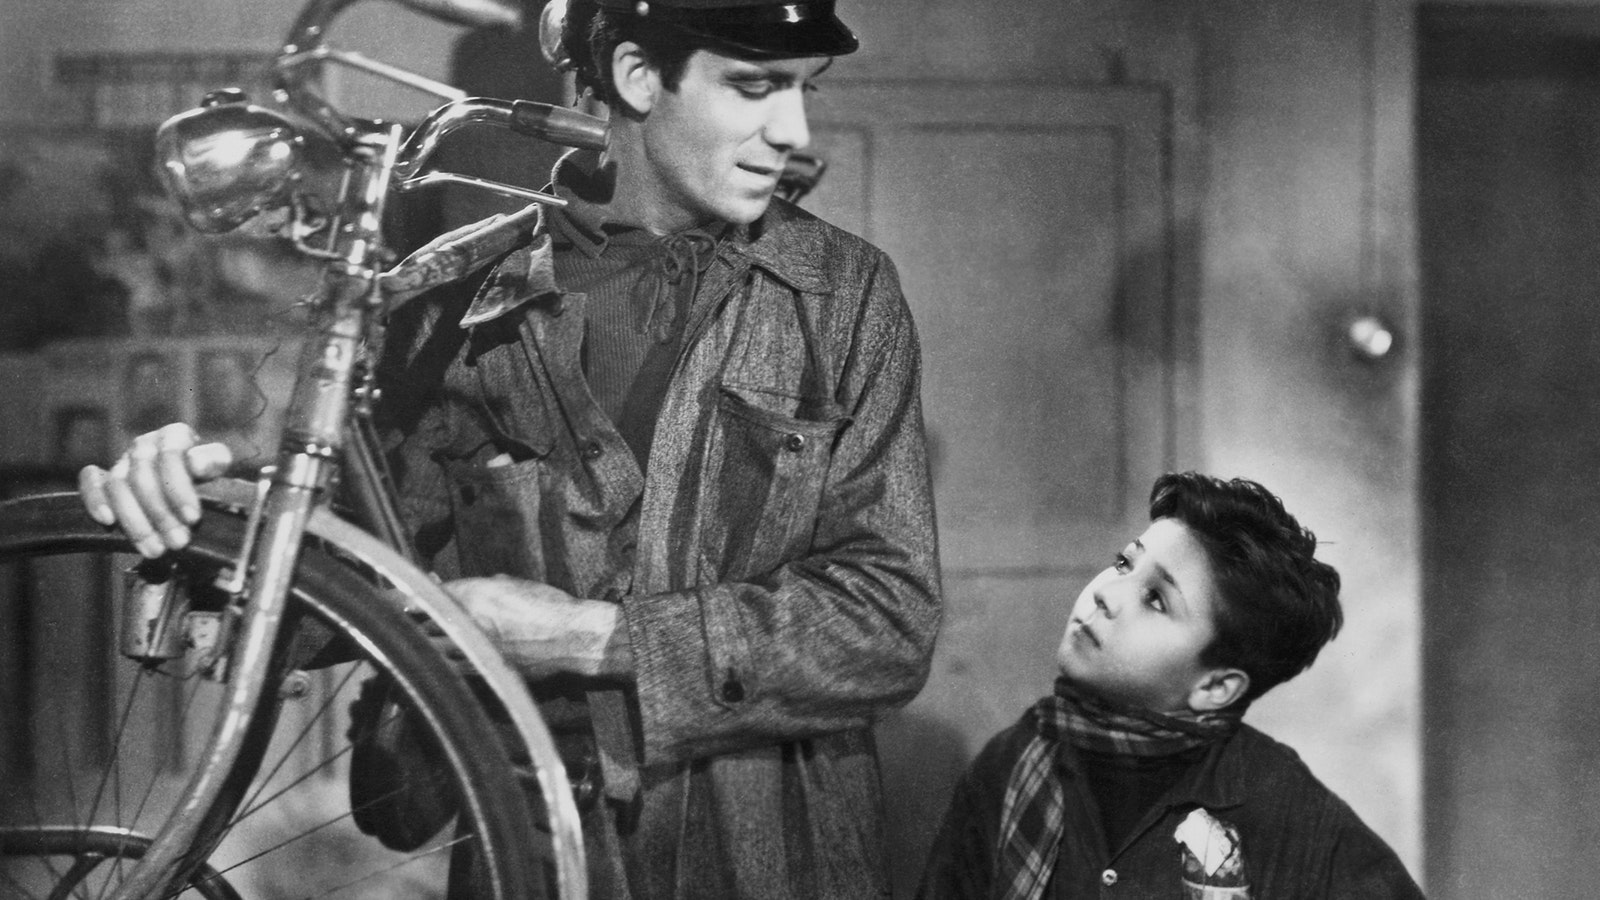 largefeatured_bicycle thieves